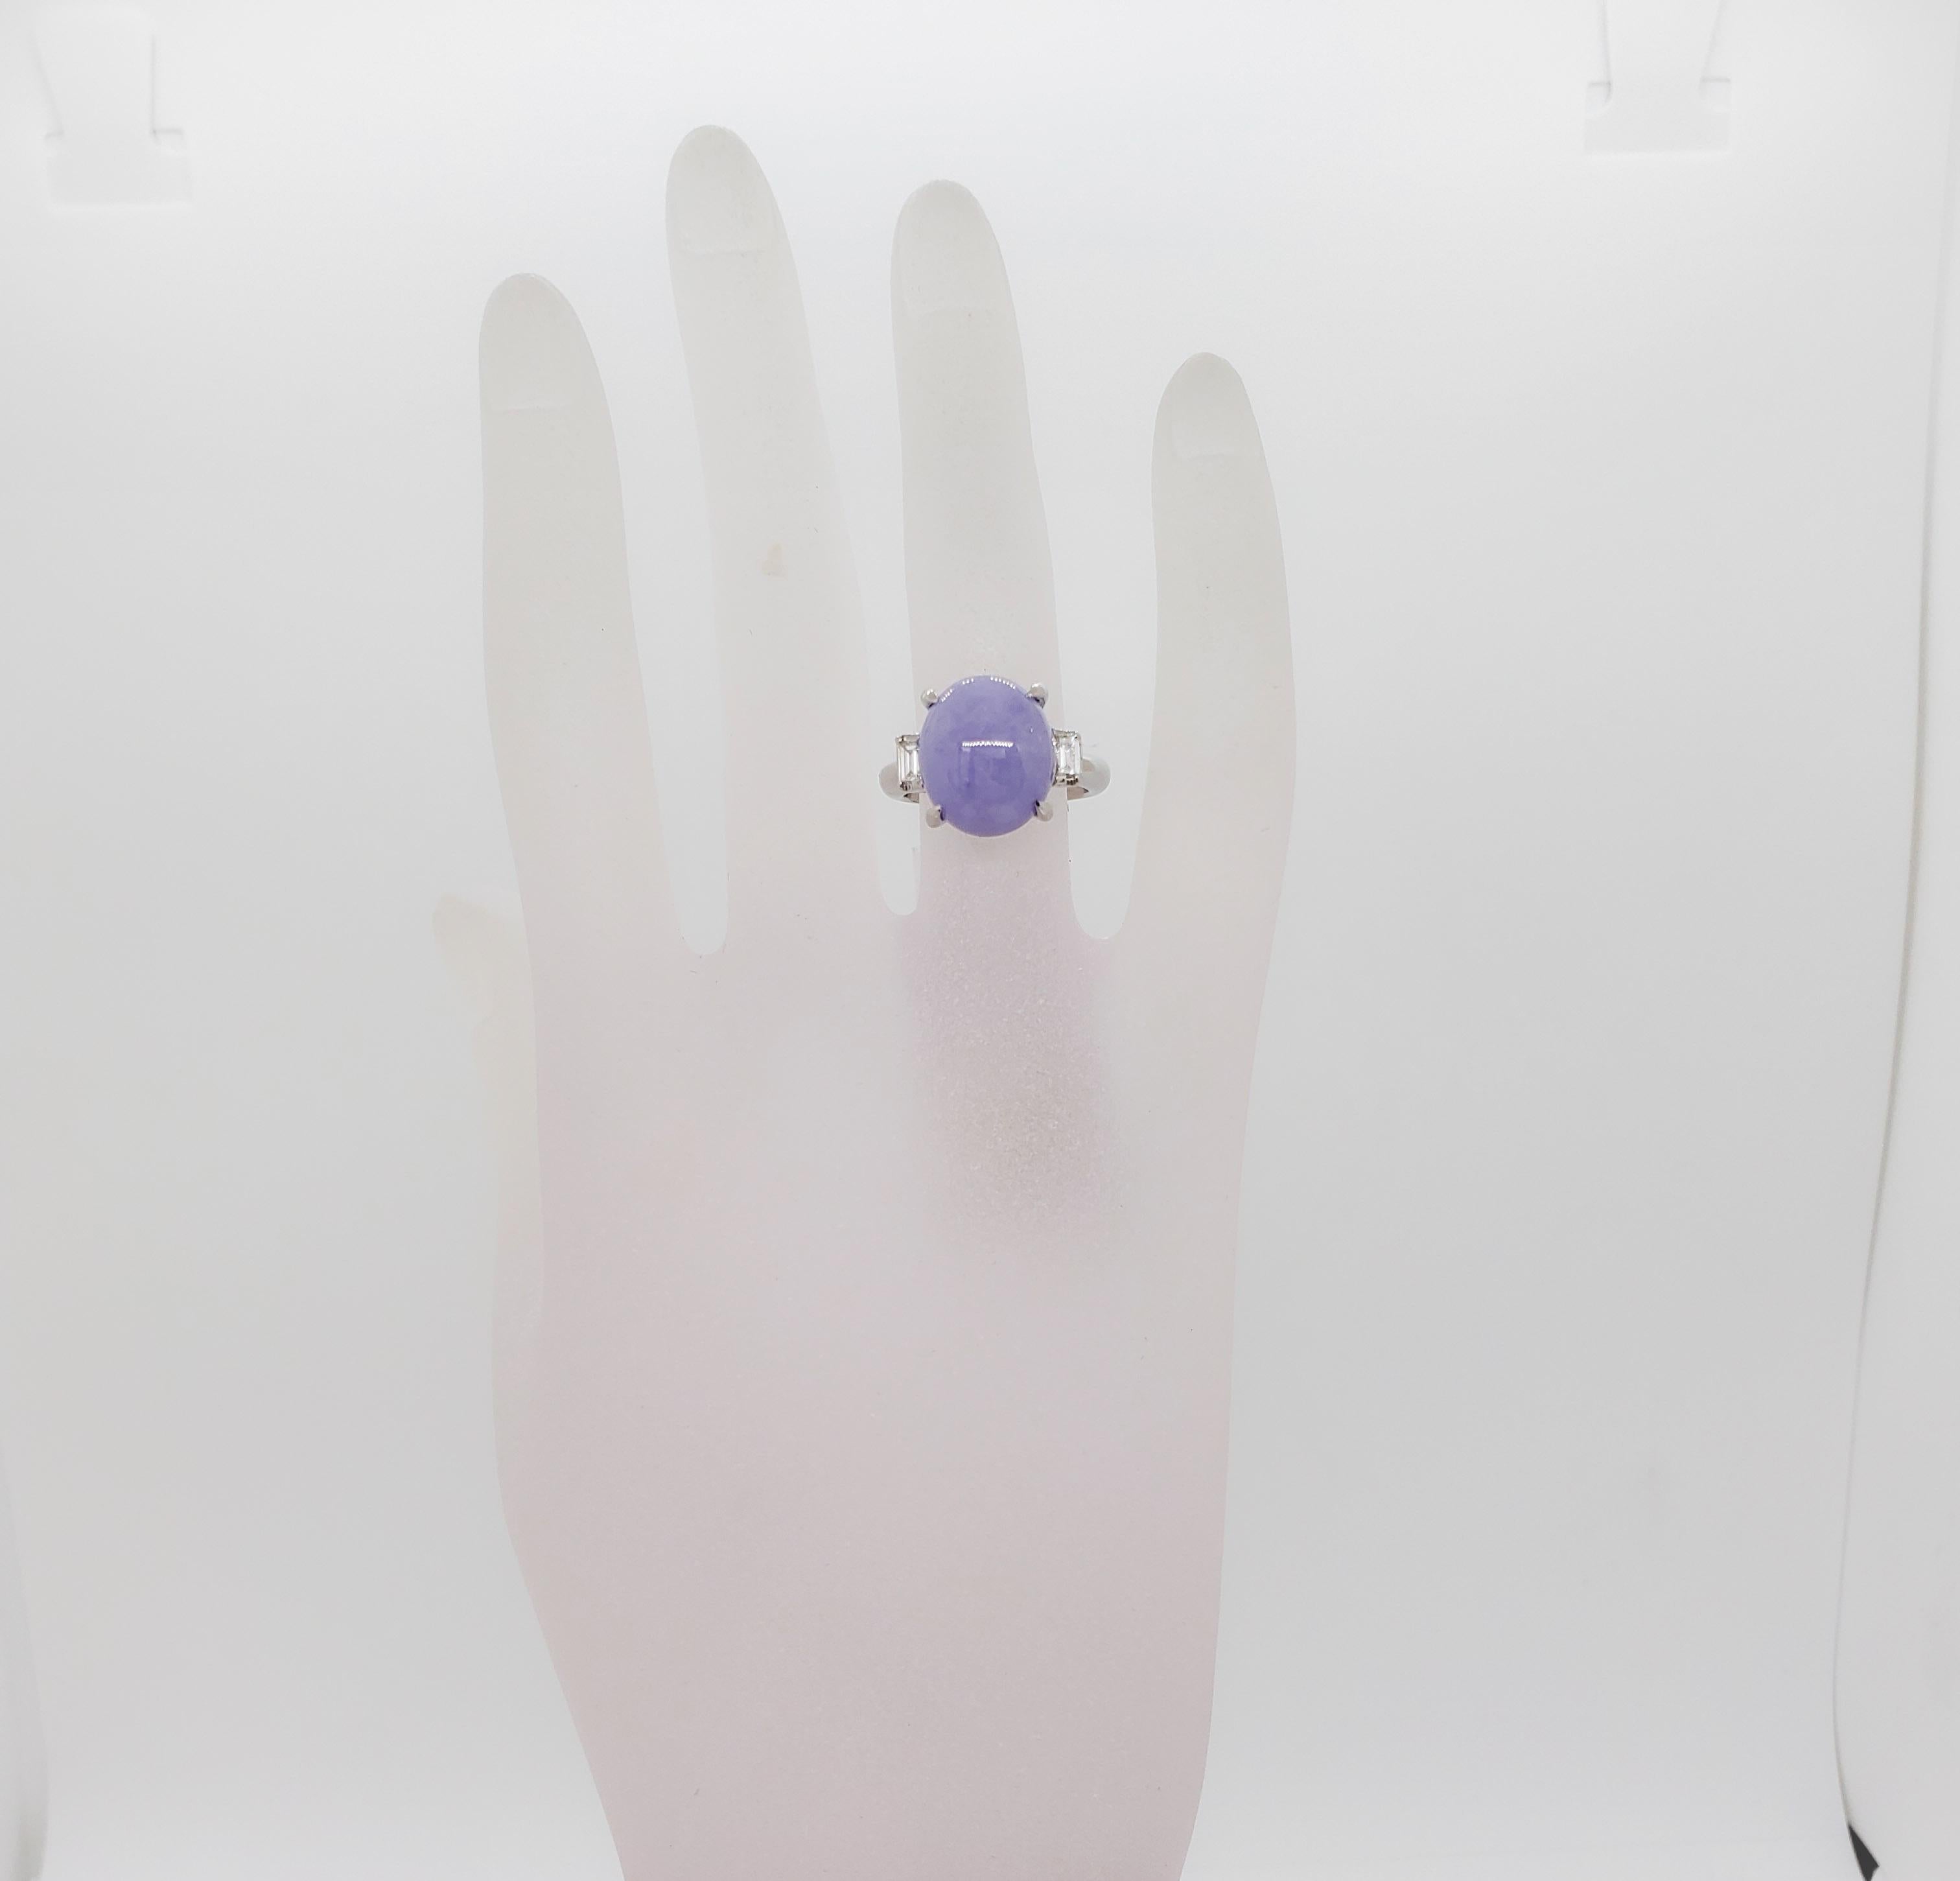 Stunning 9.21 ct. lavender jade oval cabochon with a beautiful light purple color.  On each end of the stone is an emerald cut diamond, good quality, white, and bright, weighing 0.19 ct. total.  Handmade platinum mounting in size 6.  This ring can